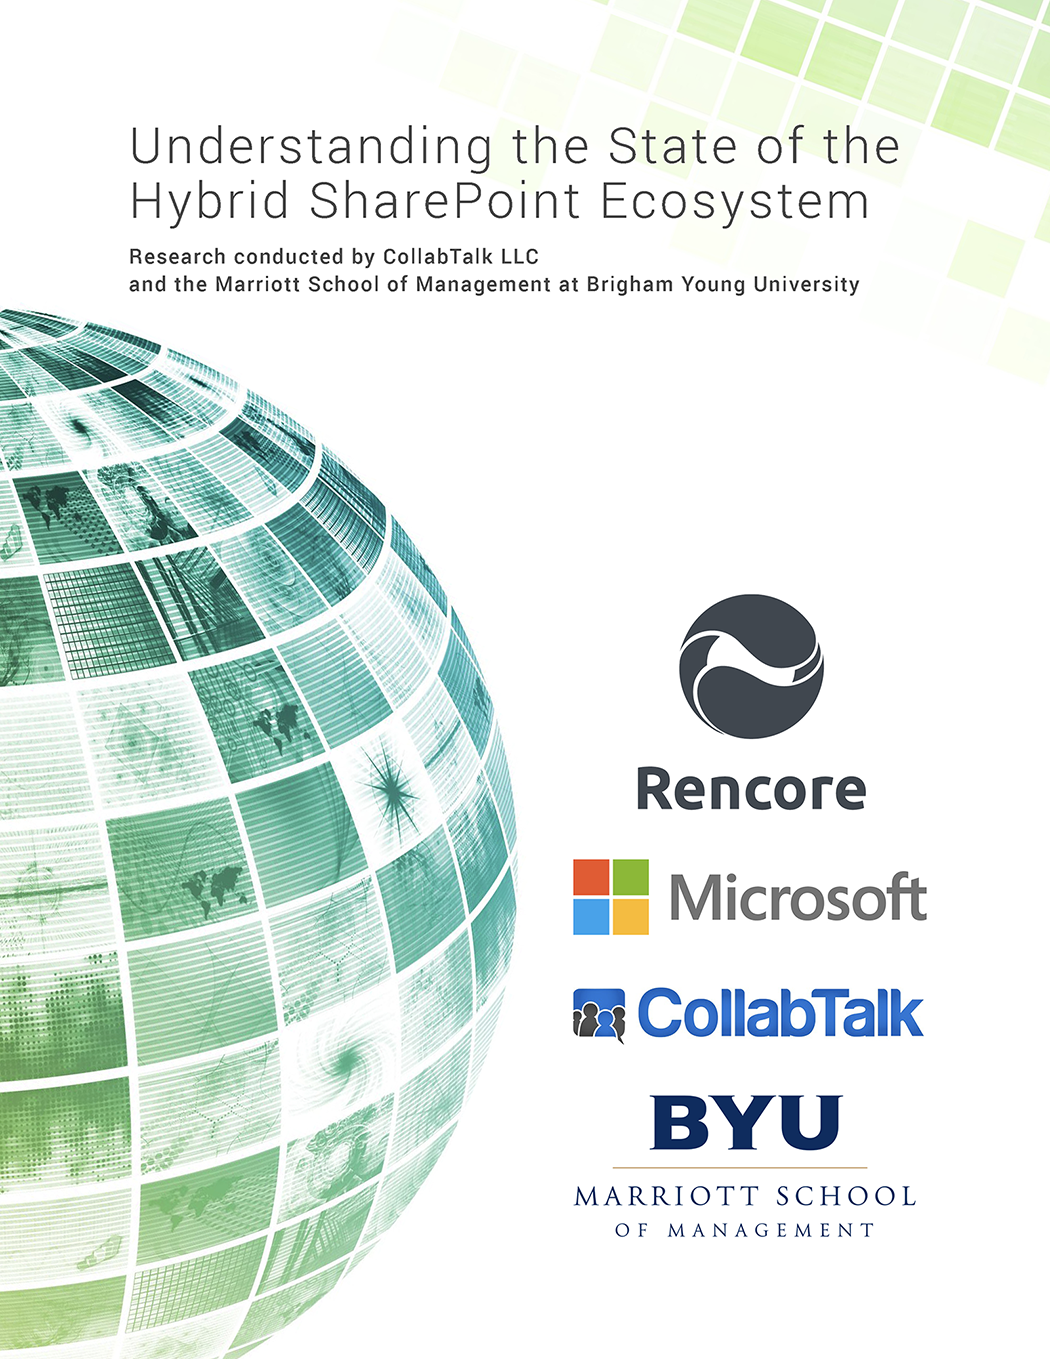 RENCORE-The-State-of-Hybrid-SharePoint-2017_Page_01-1